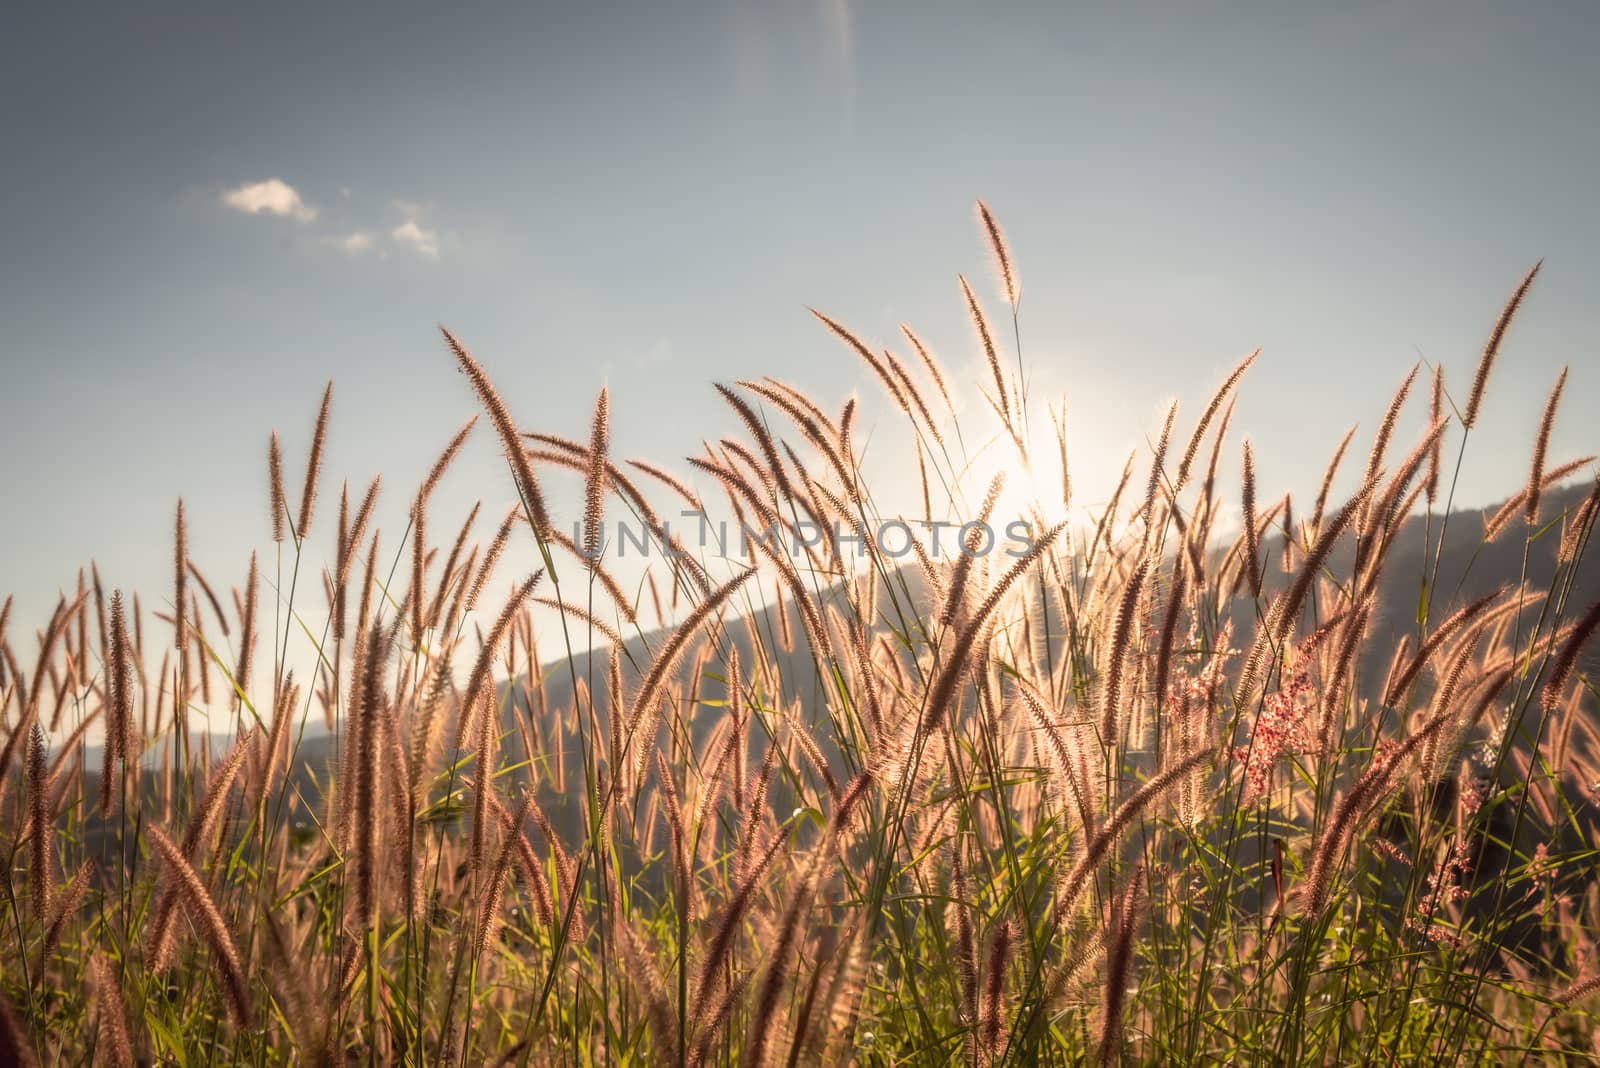 Natural Background of Grass Flowers Field at Sunset Scenery, Nature Landscape of Meadow Fields With Sunlight. Beautiful Spring Grass Flower on Mountains Scenic Backgrounds by MahaHeang245789